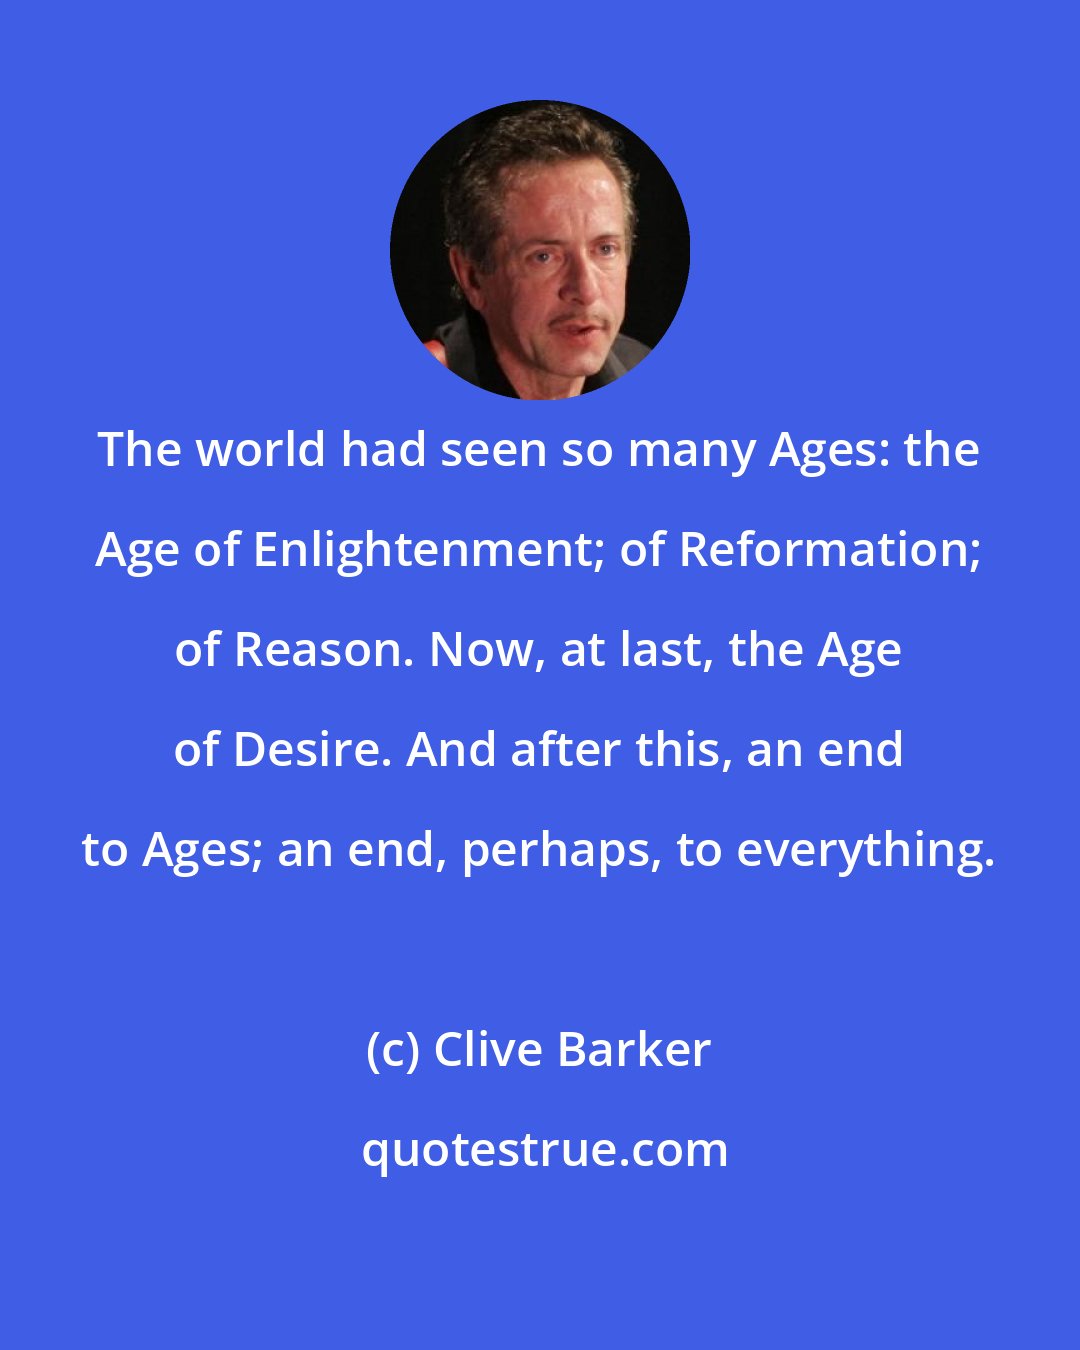 Clive Barker: The world had seen so many Ages: the Age of Enlightenment; of Reformation; of Reason. Now, at last, the Age of Desire. And after this, an end to Ages; an end, perhaps, to everything.